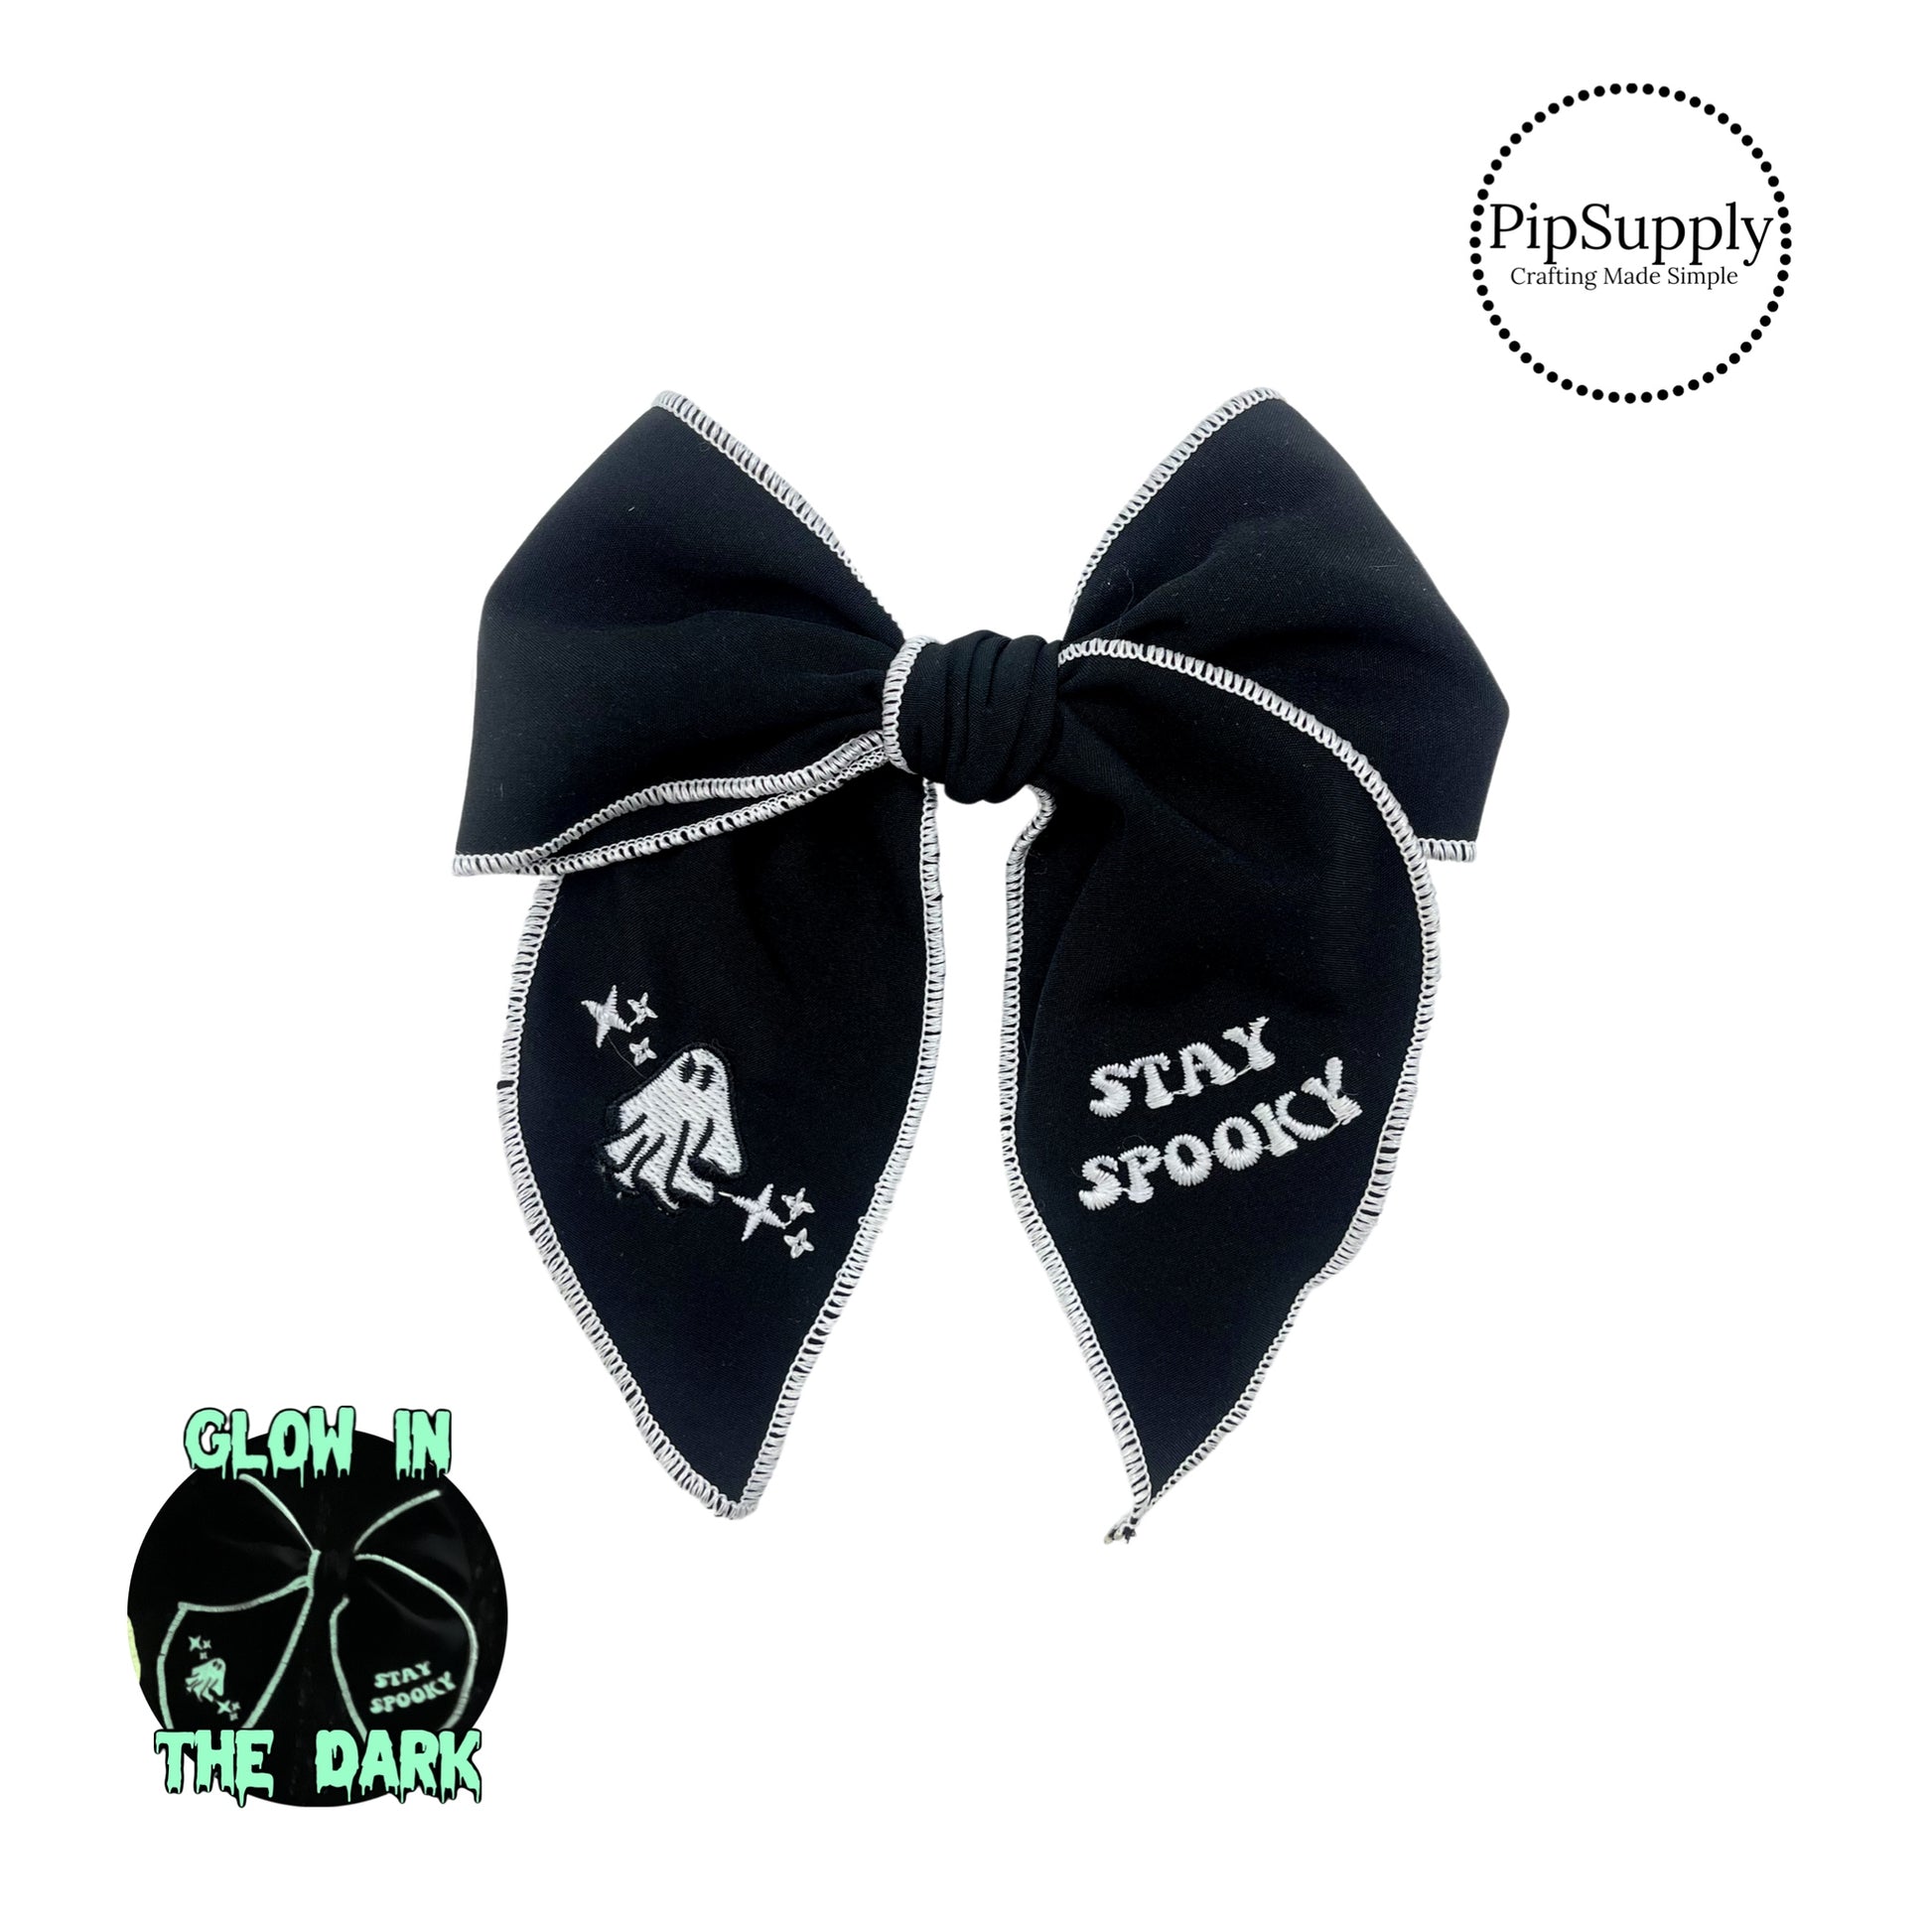 White ghosts with stay spooky sayings on black hair bows